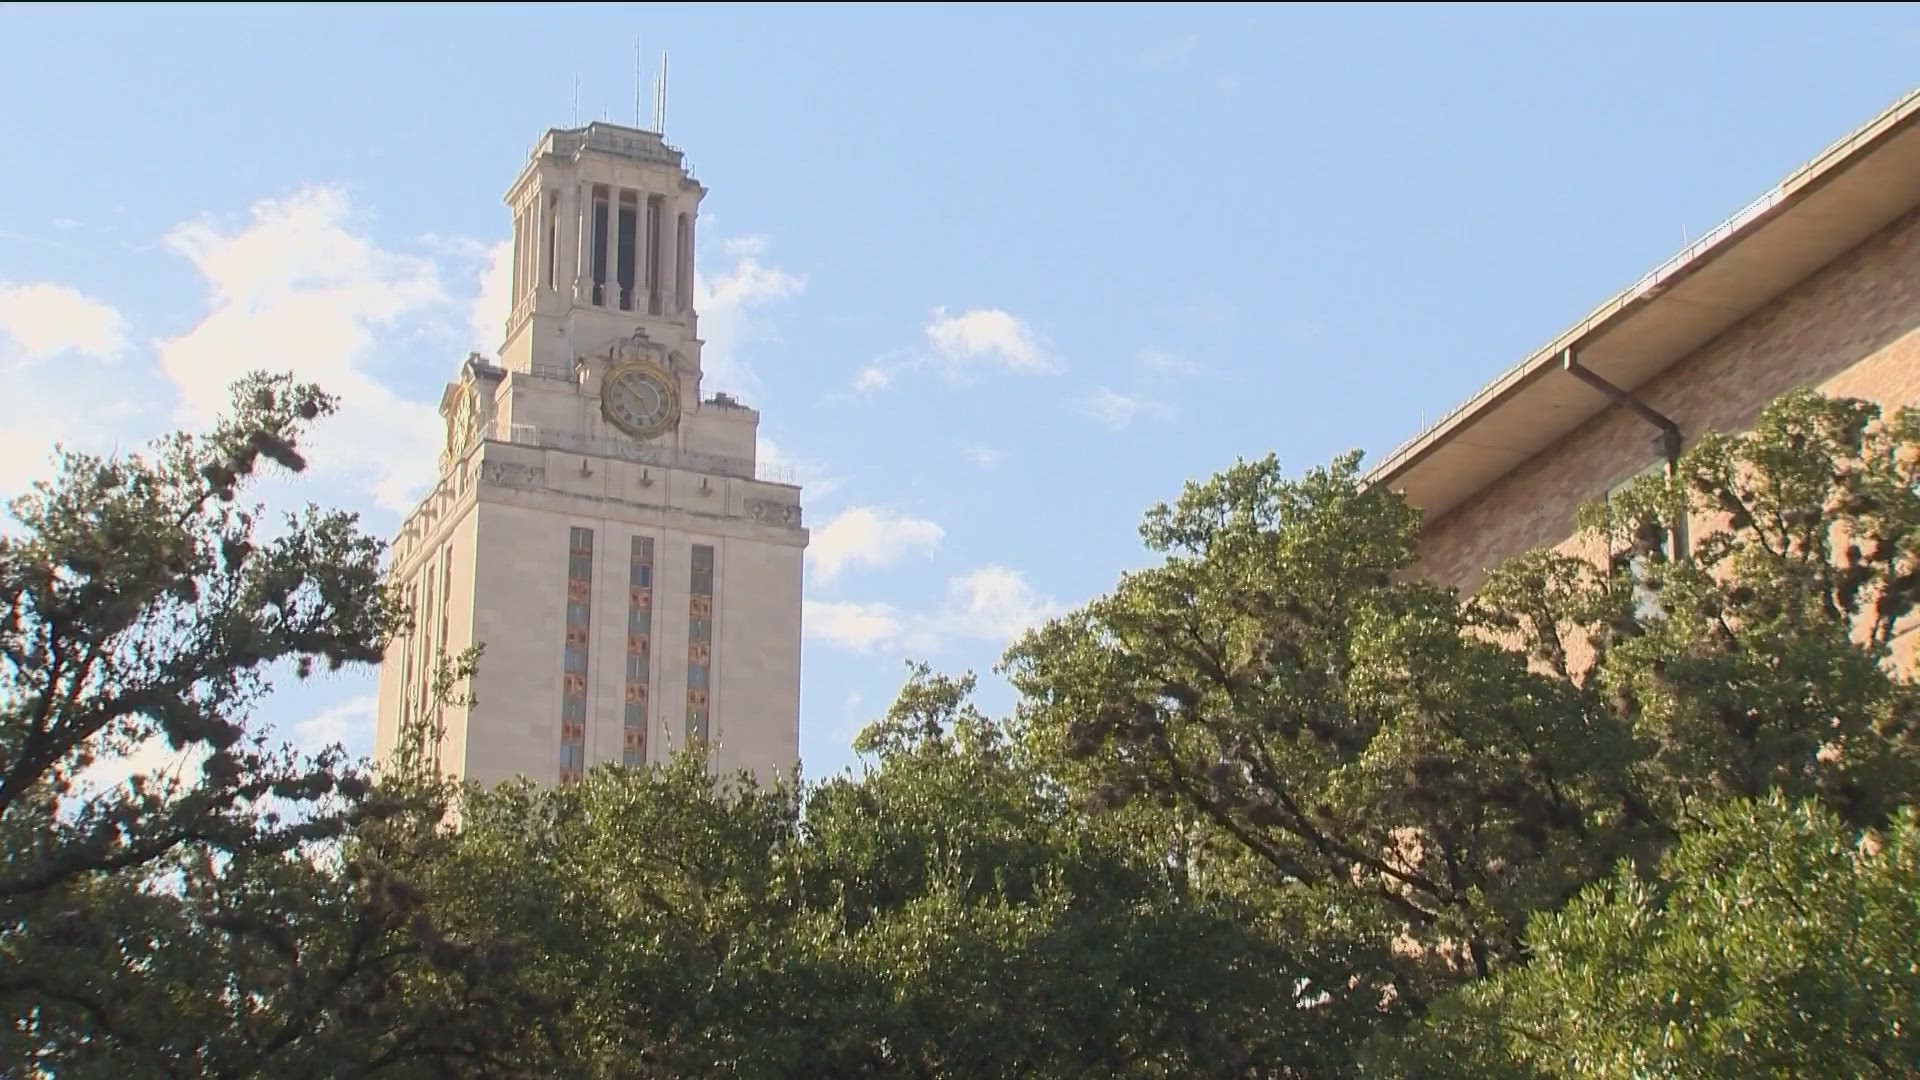 The Texas House gave final approval to Senate Bill 17, which would ban public colleges and universities from having Diversity, Equity and Inclusion offices.